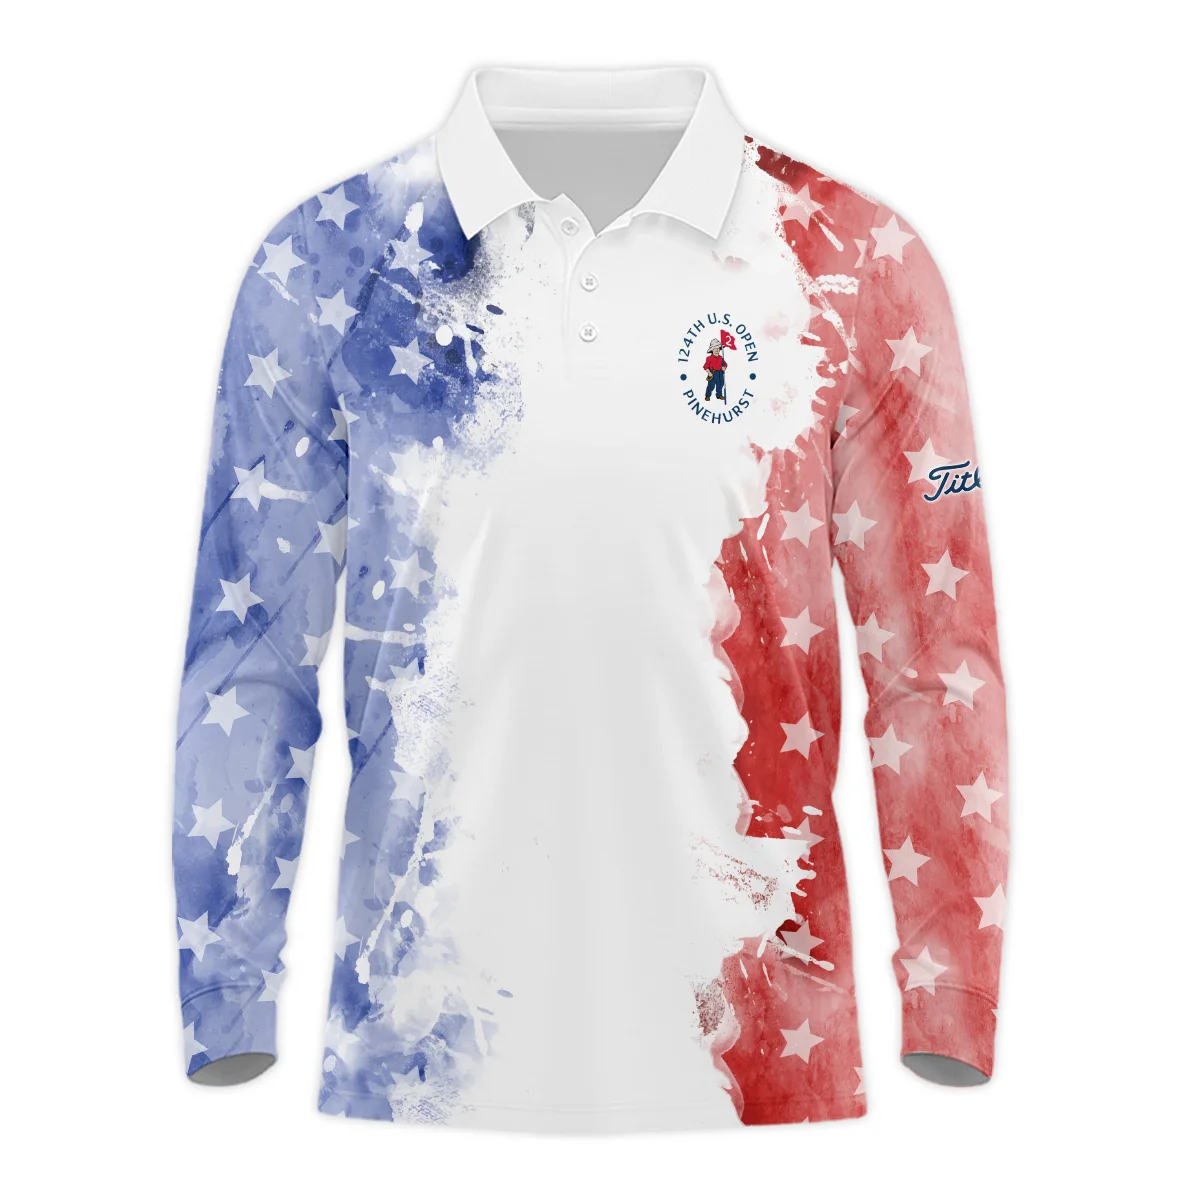 124th U.S. Open Pinehurst Special Version Titleist Polo Shirt Blue Red Watercolor Polo Shirt For Men